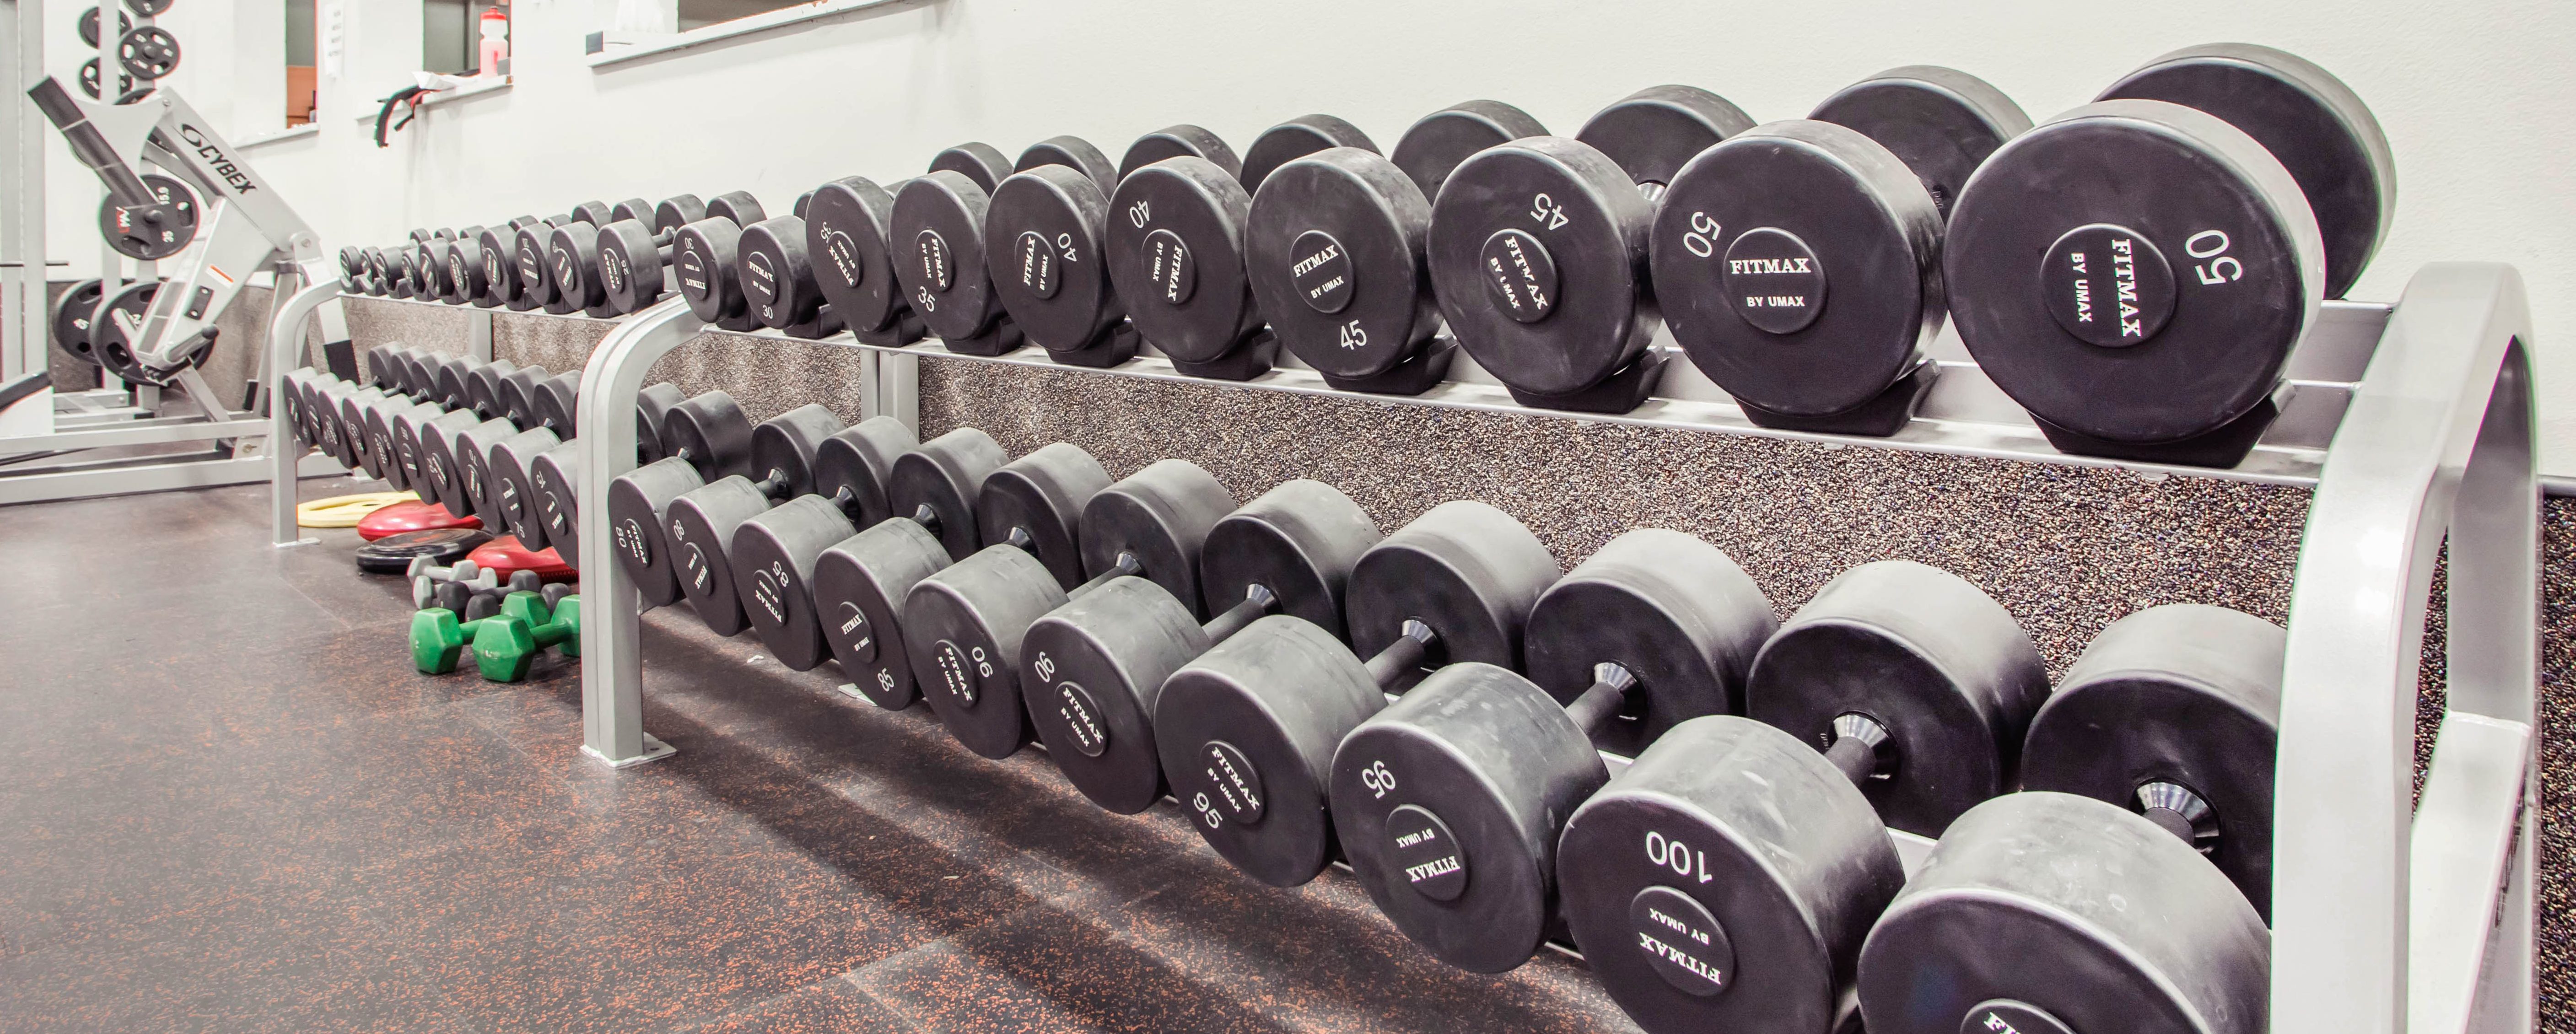 Dumbells at Sachs Recreation Center. Weights range from less than 35 pounds to 100 pounds.